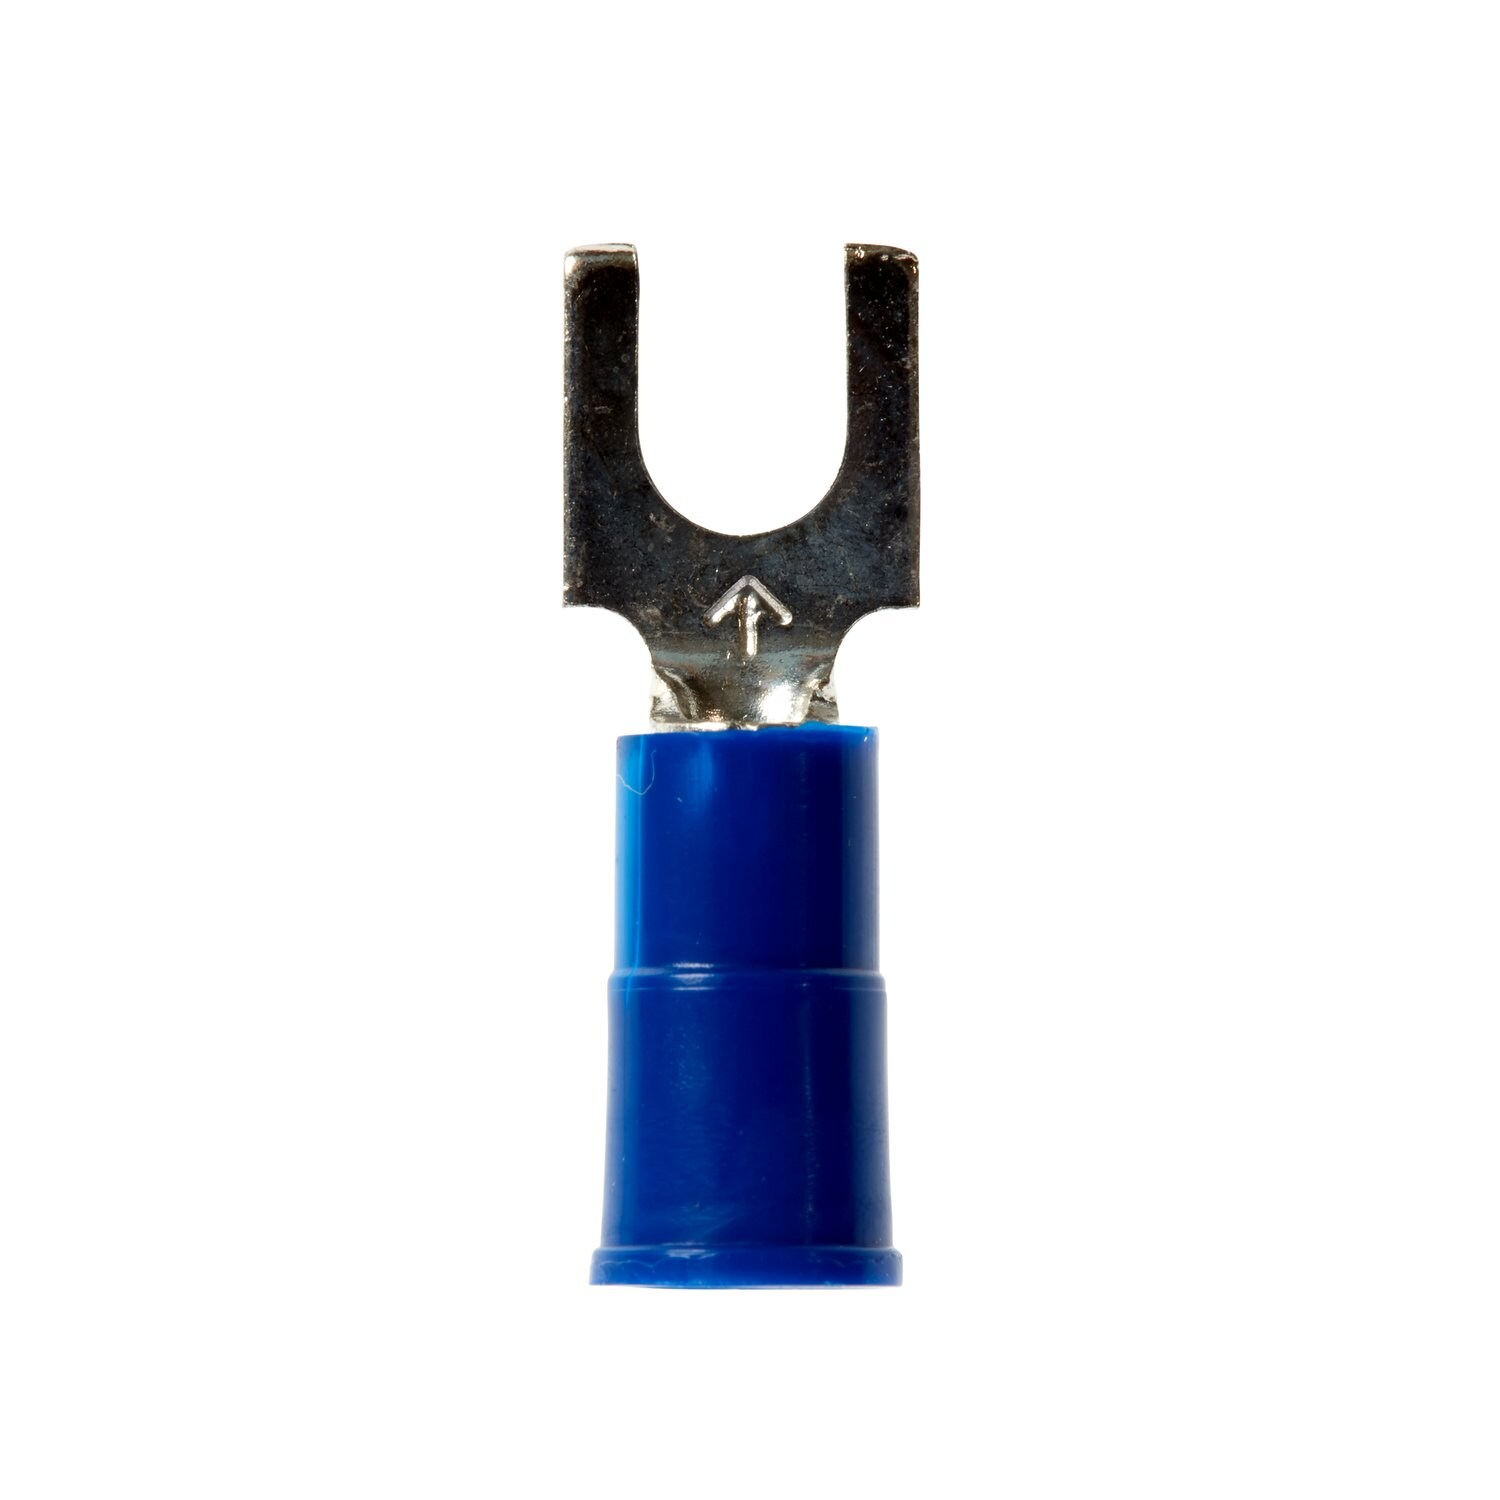 7000132253 - 3M Scotchlok Block Fork, Vinyl Insulated Butted Seam MVU14-8FBK, Stud
Size 8, suitable for use in a terminal block, 1000/Case